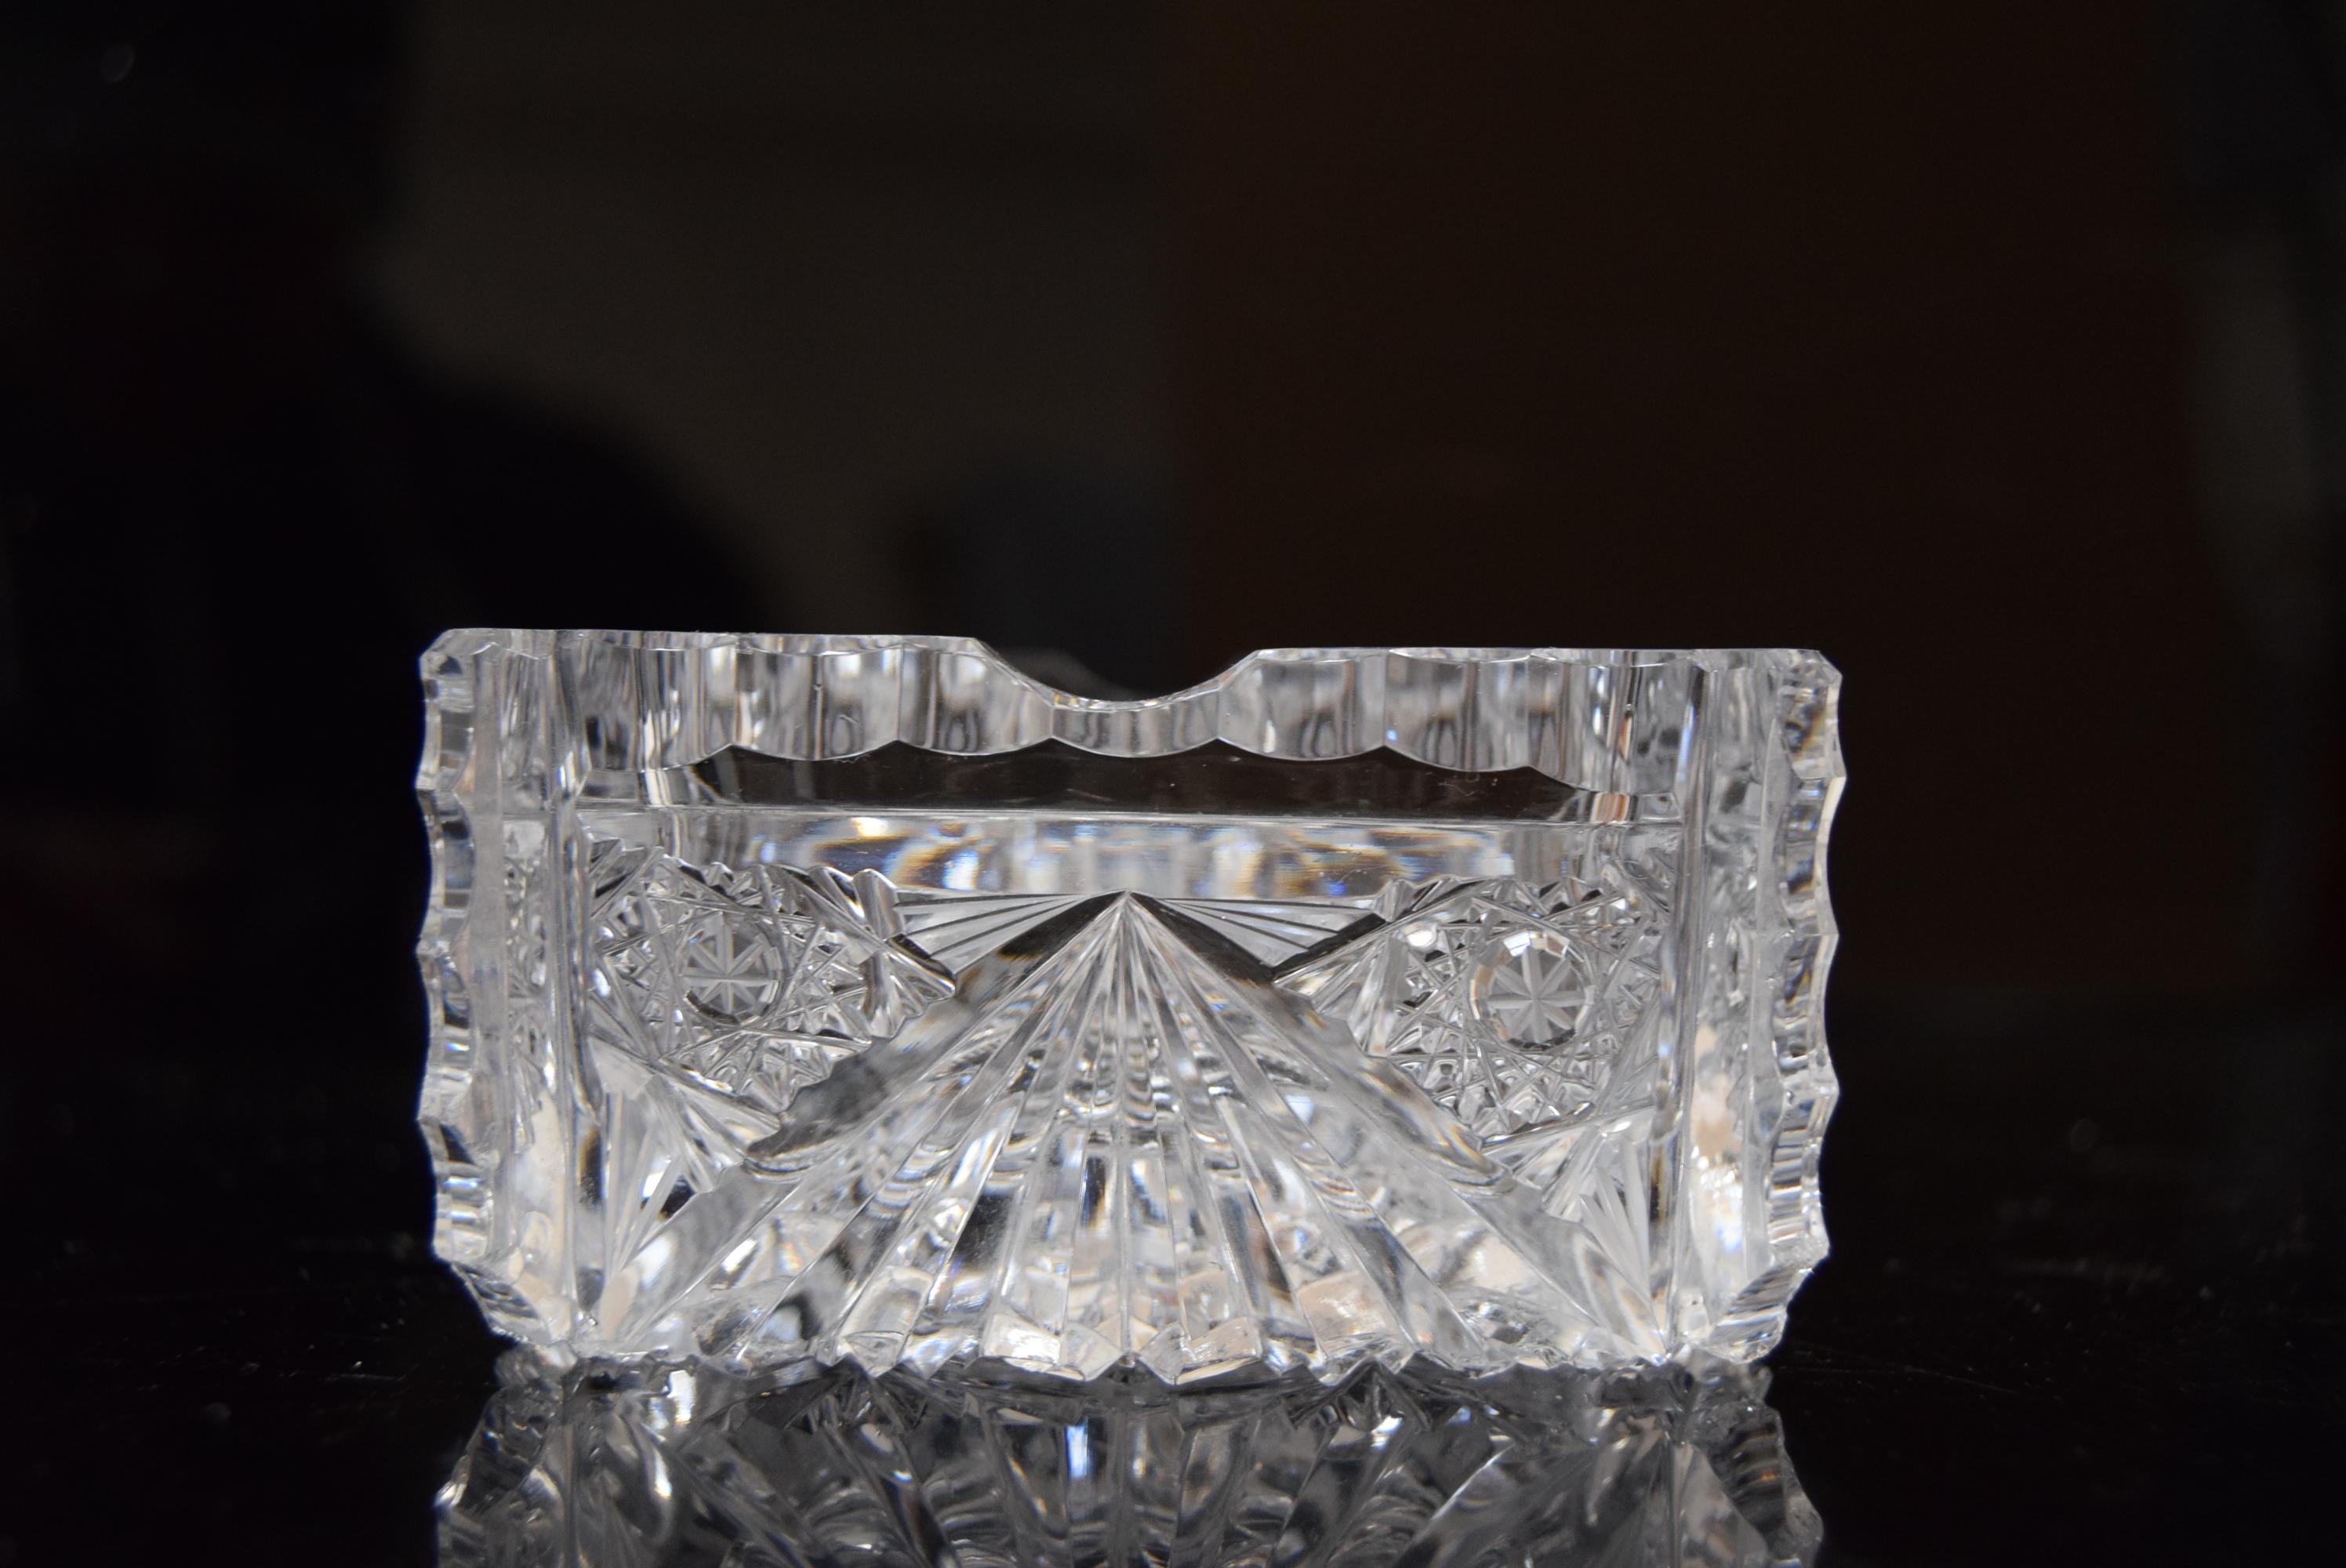 Pair of Rare Vintage Ashtrays, Cut Crystal Glass, Bohemia in the, 1960s For Sale 7